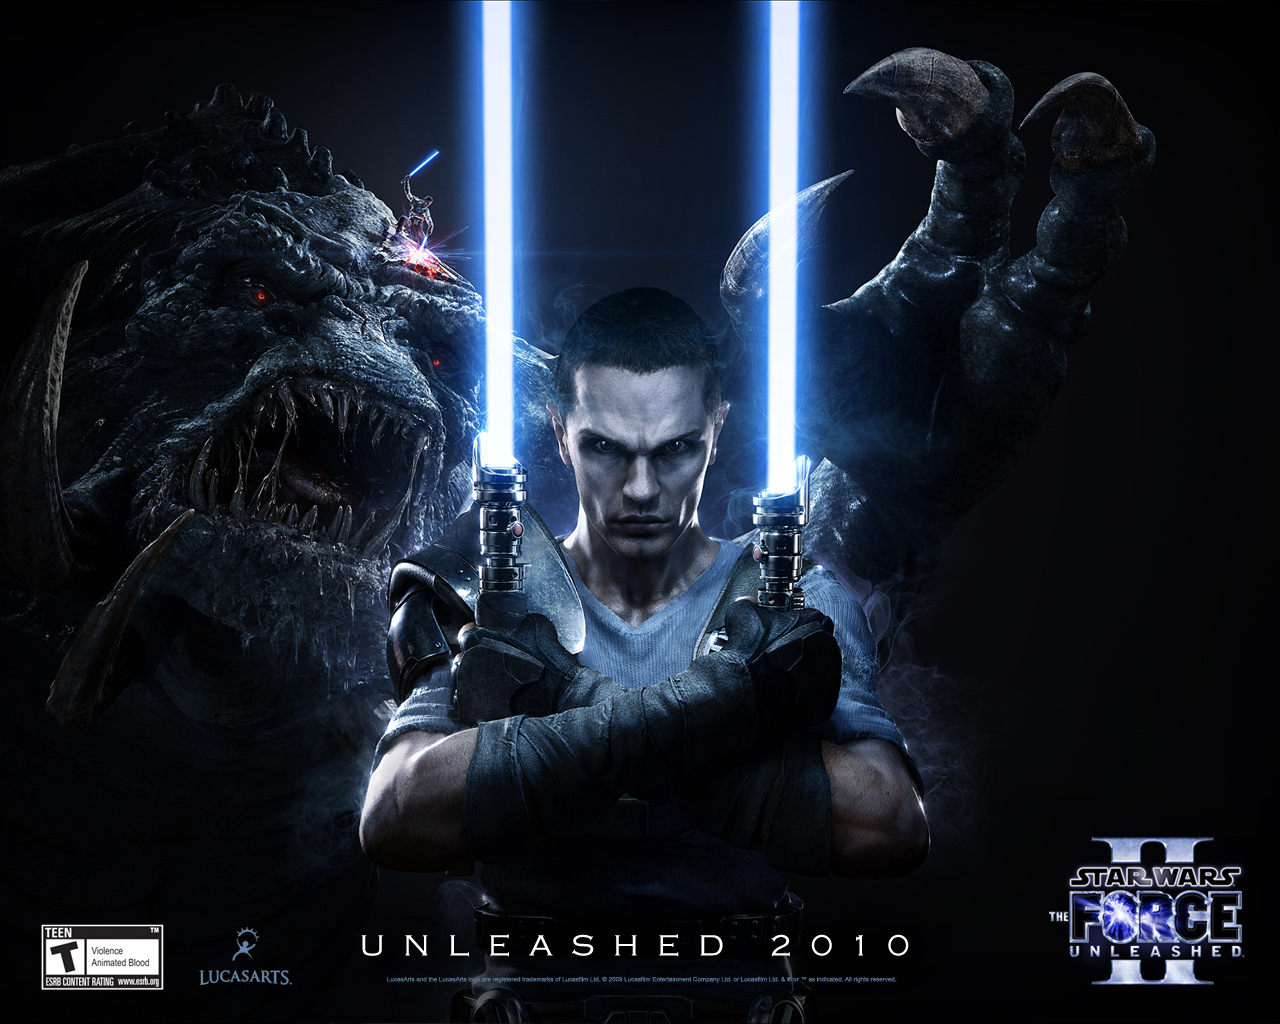 Star Wars: The Force Unleashed #19